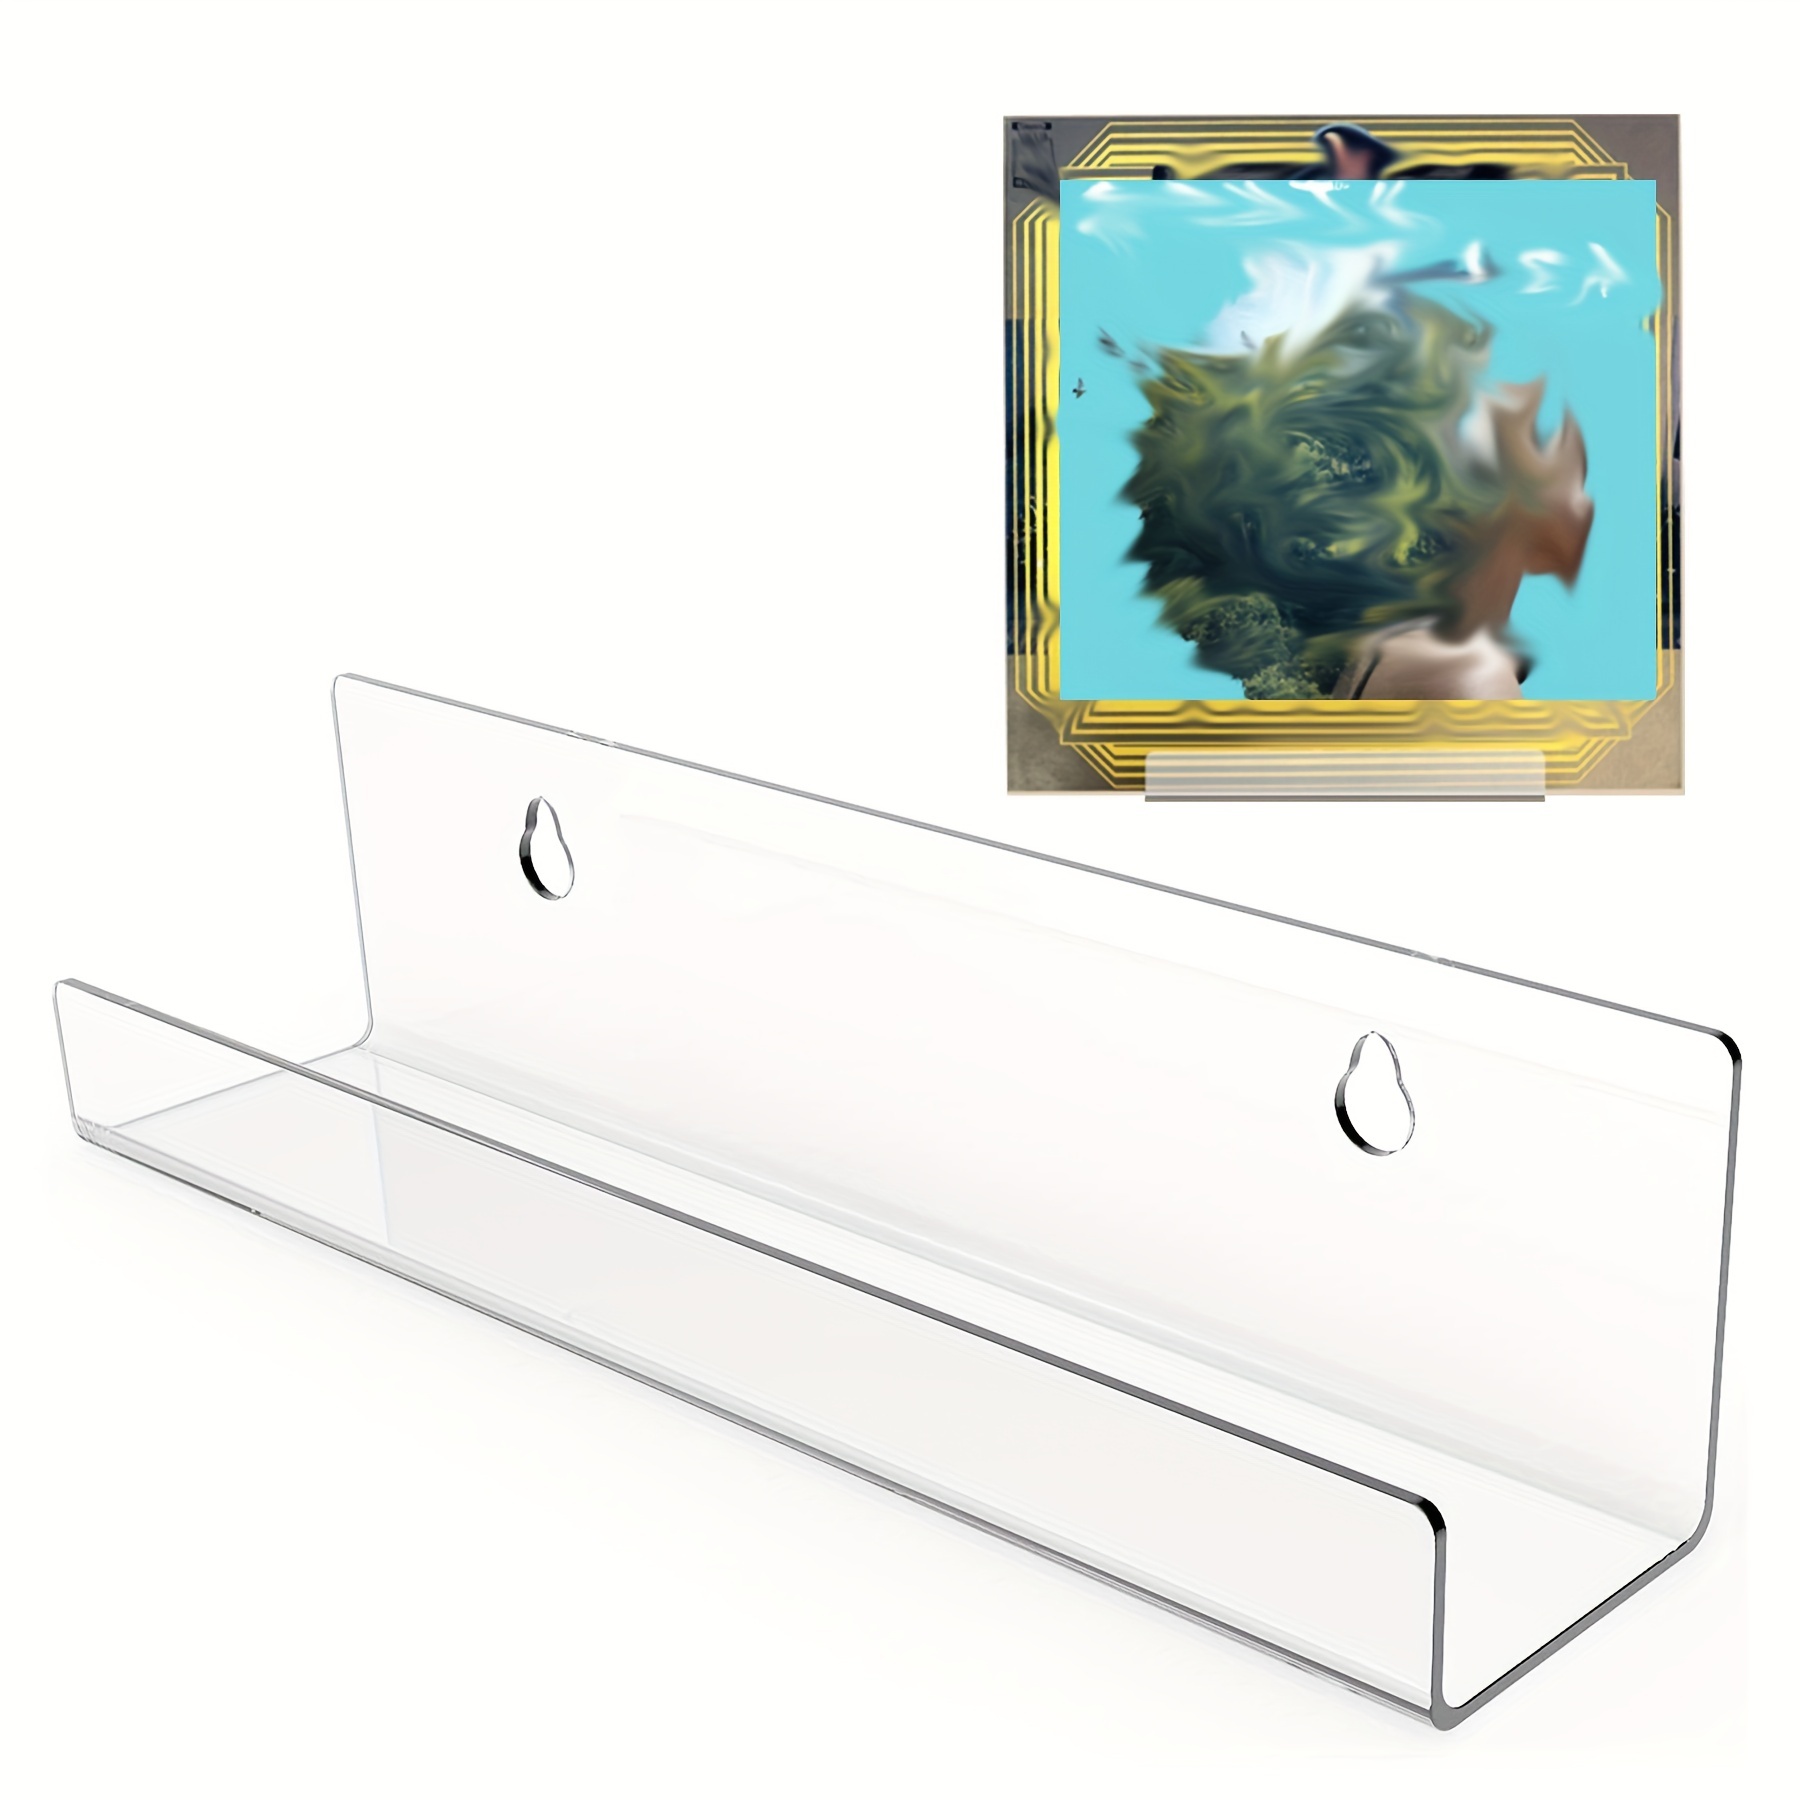 CollectorMount Album Mount Vinyl Record Shelf Stand and Wall Mount, Invisible and Adjustable (5)